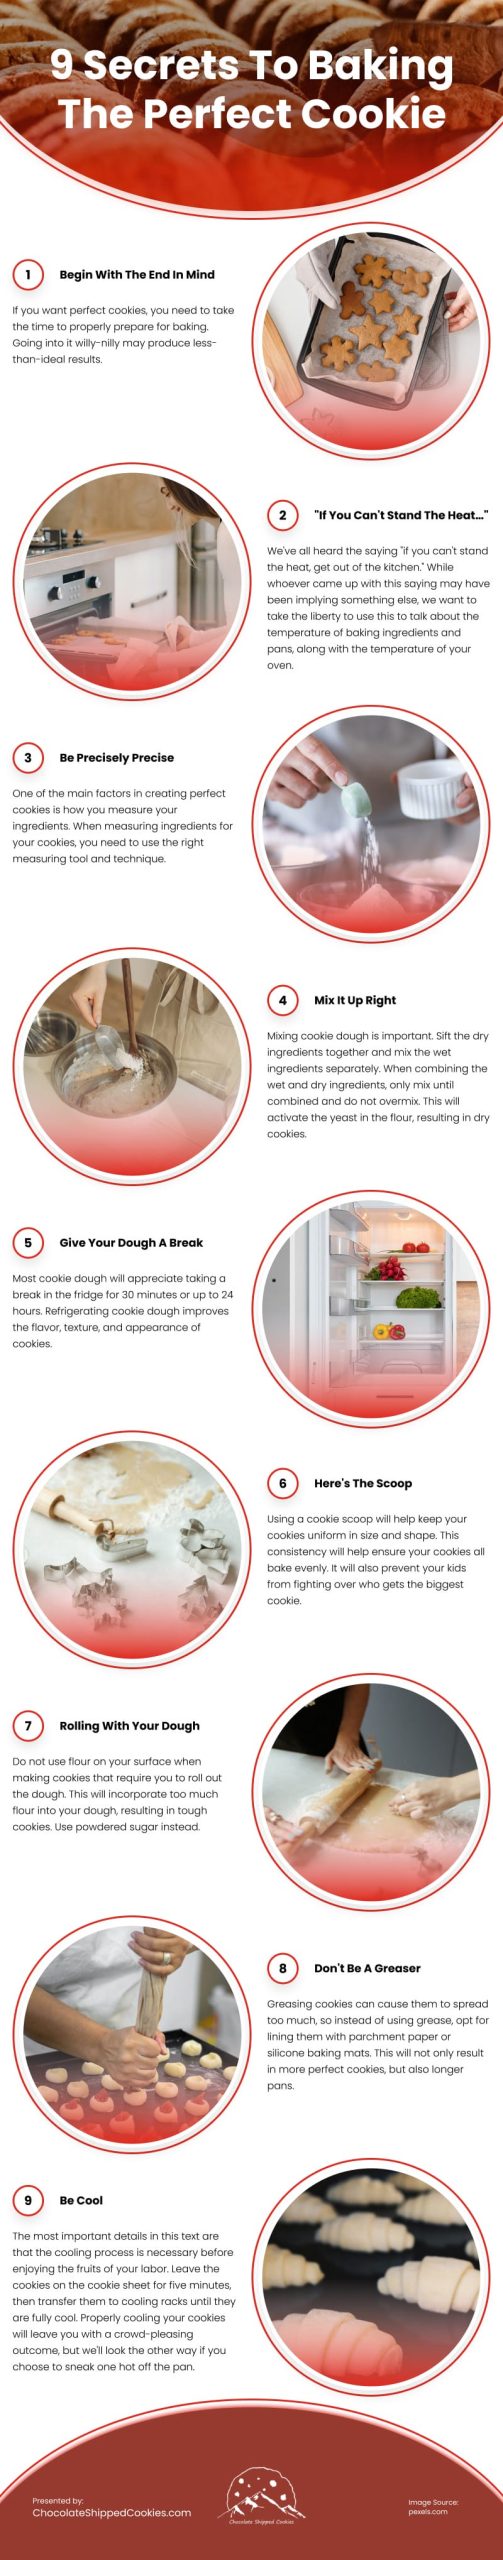 9 Secrets To Baking The Perfect Cookie Infographic